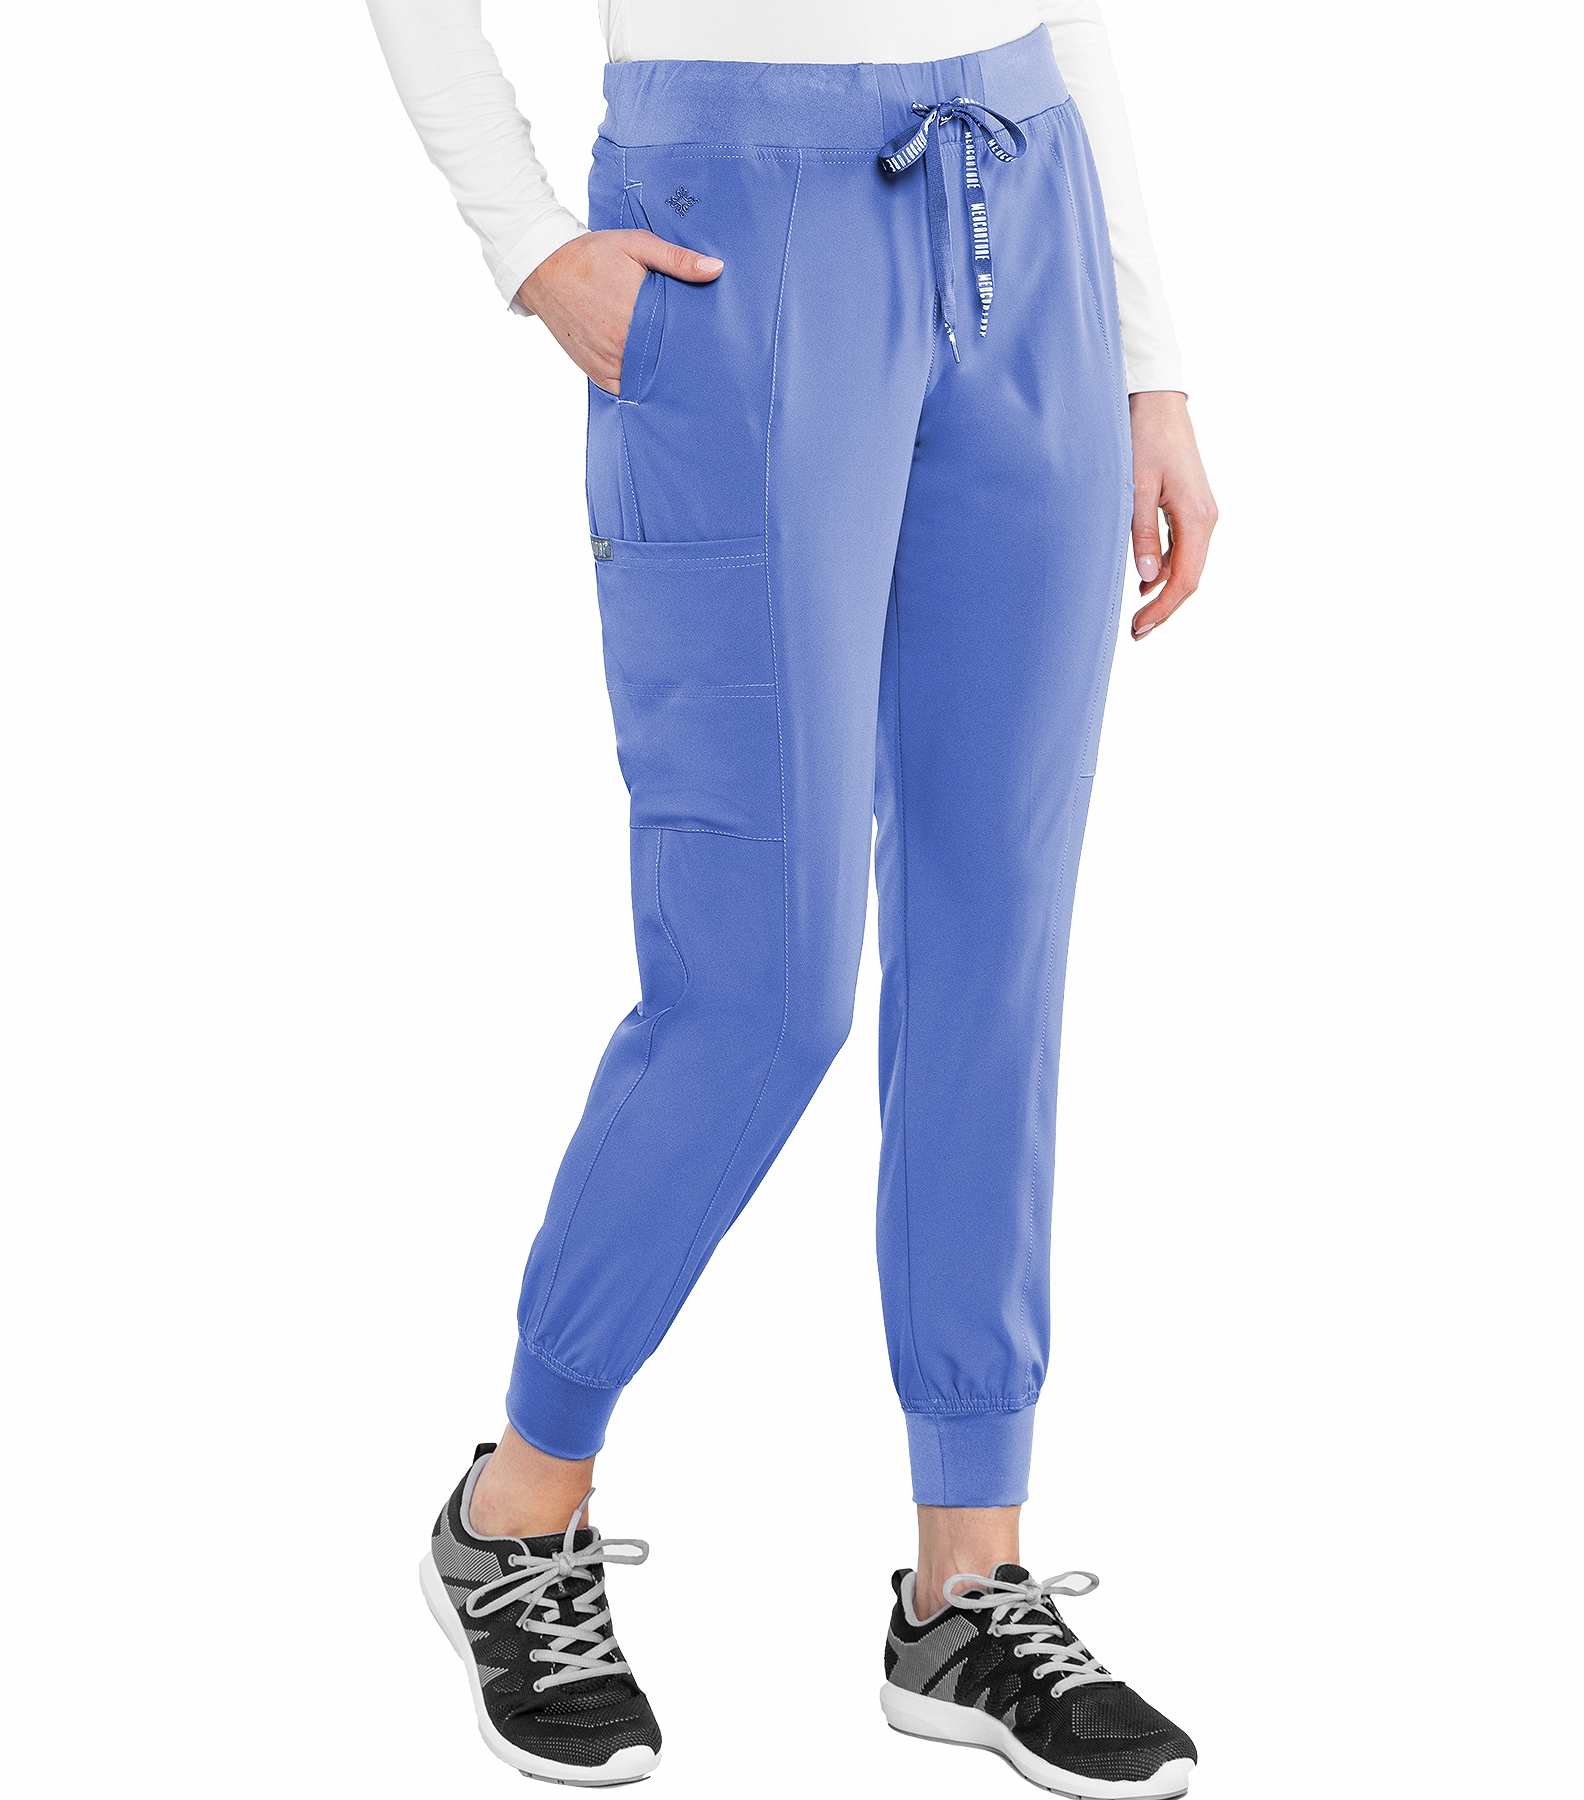 Med Couture Peaches Women's Seamed Jogger Scrub Pants-8721 | Medical ...